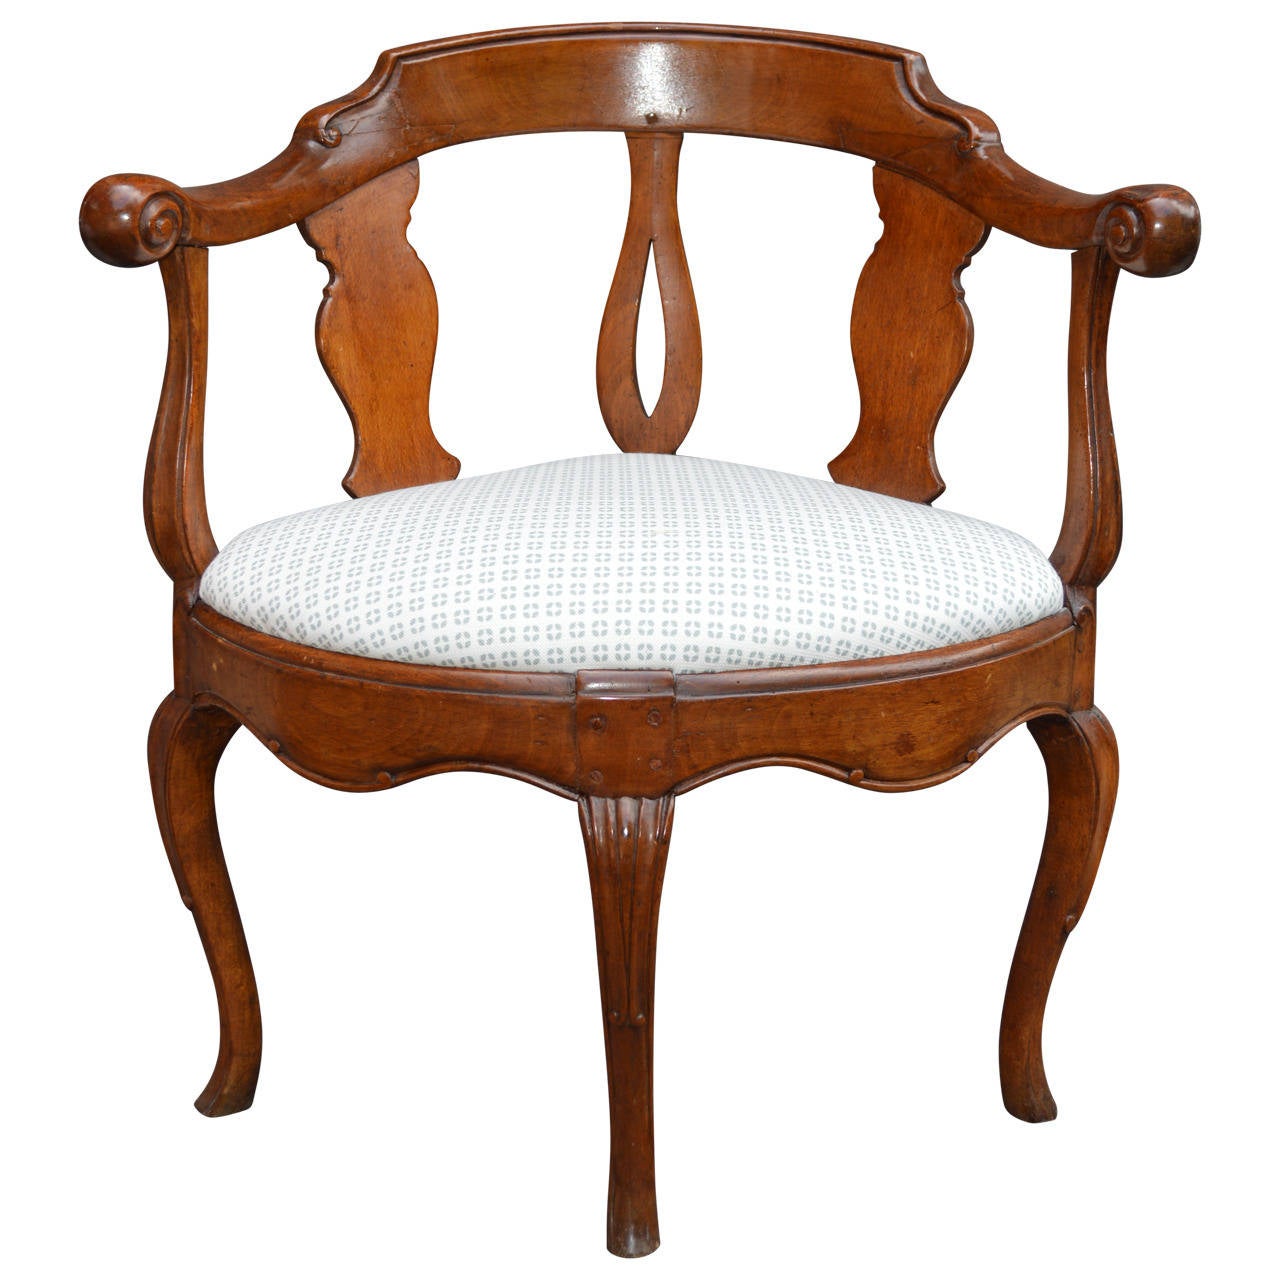 Beautiful Danish fruitwood corner armchair upholstered with versatile white fabric with small teal diamond pattern.